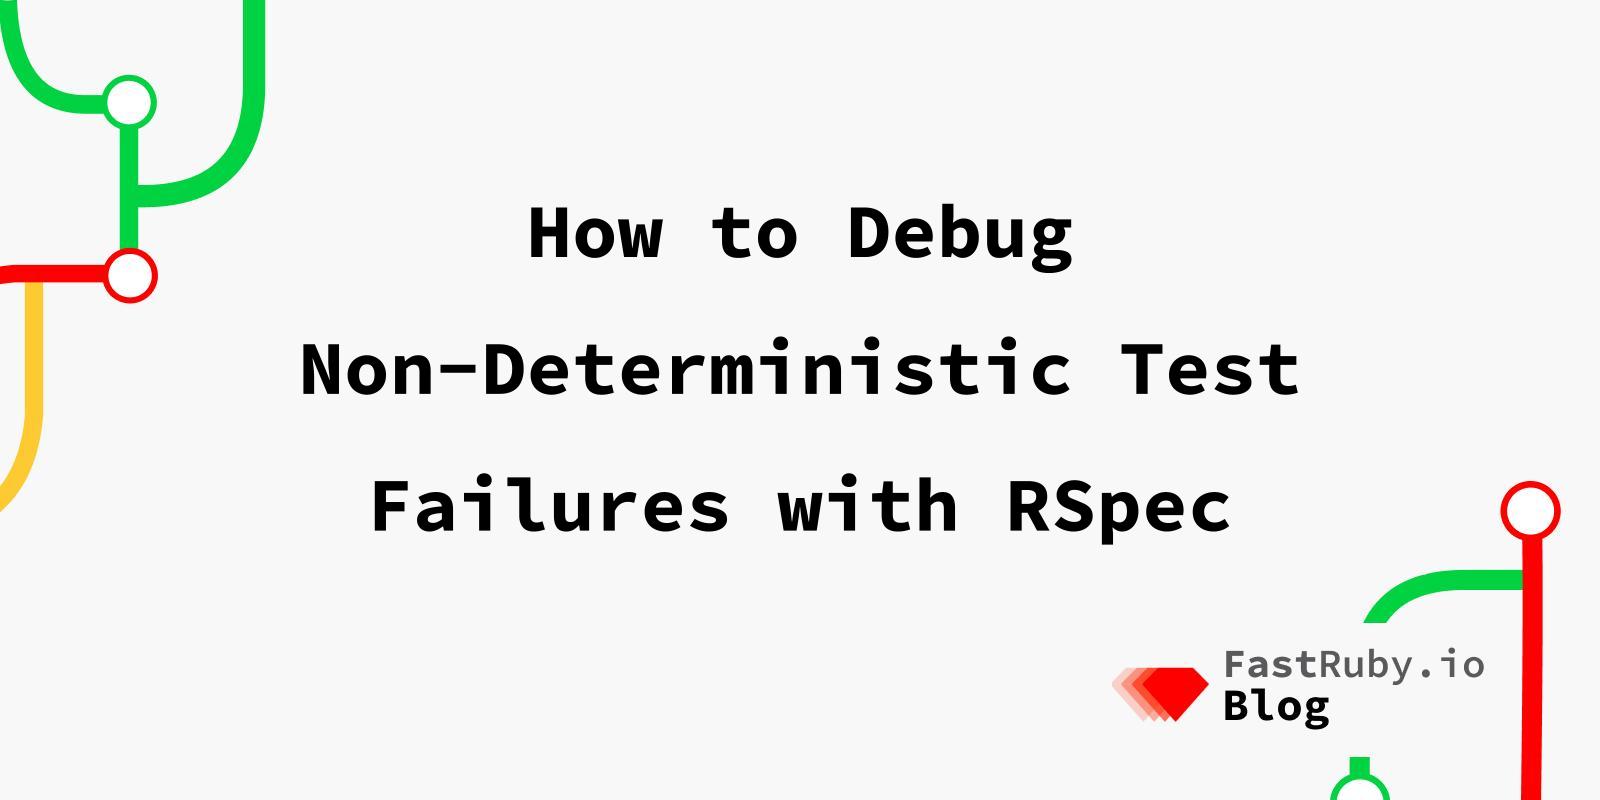 How to Debug Non-Deterministic Test Failures with RSpec